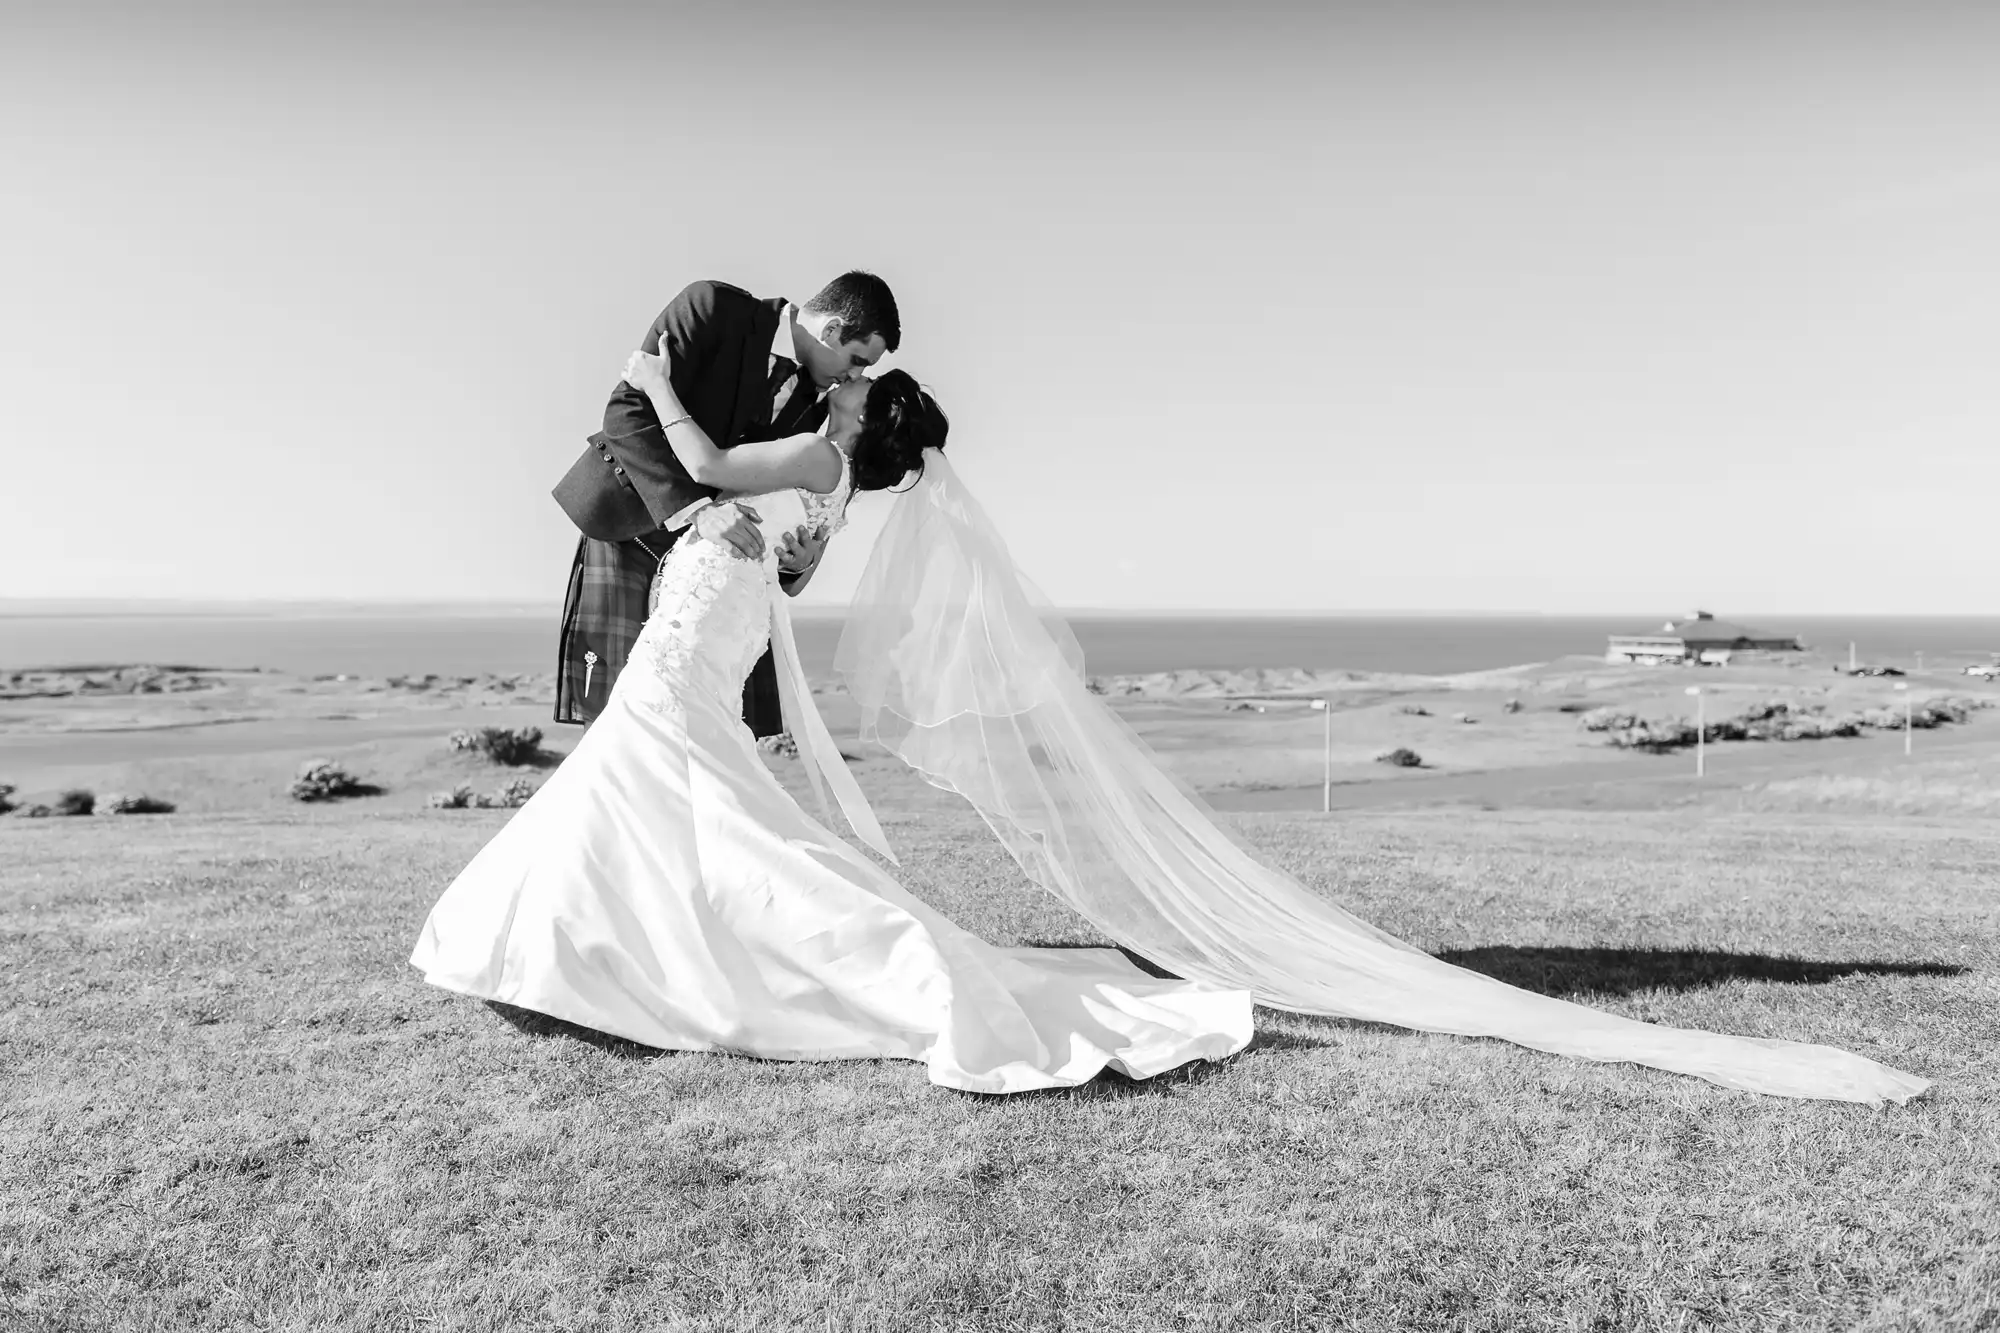 A bride and groom share a kiss on a grassy seaside meadow; the groom wears a kilt, and the bride's long veil flows elegantly in the breeze, with a coastal landscape in the background.